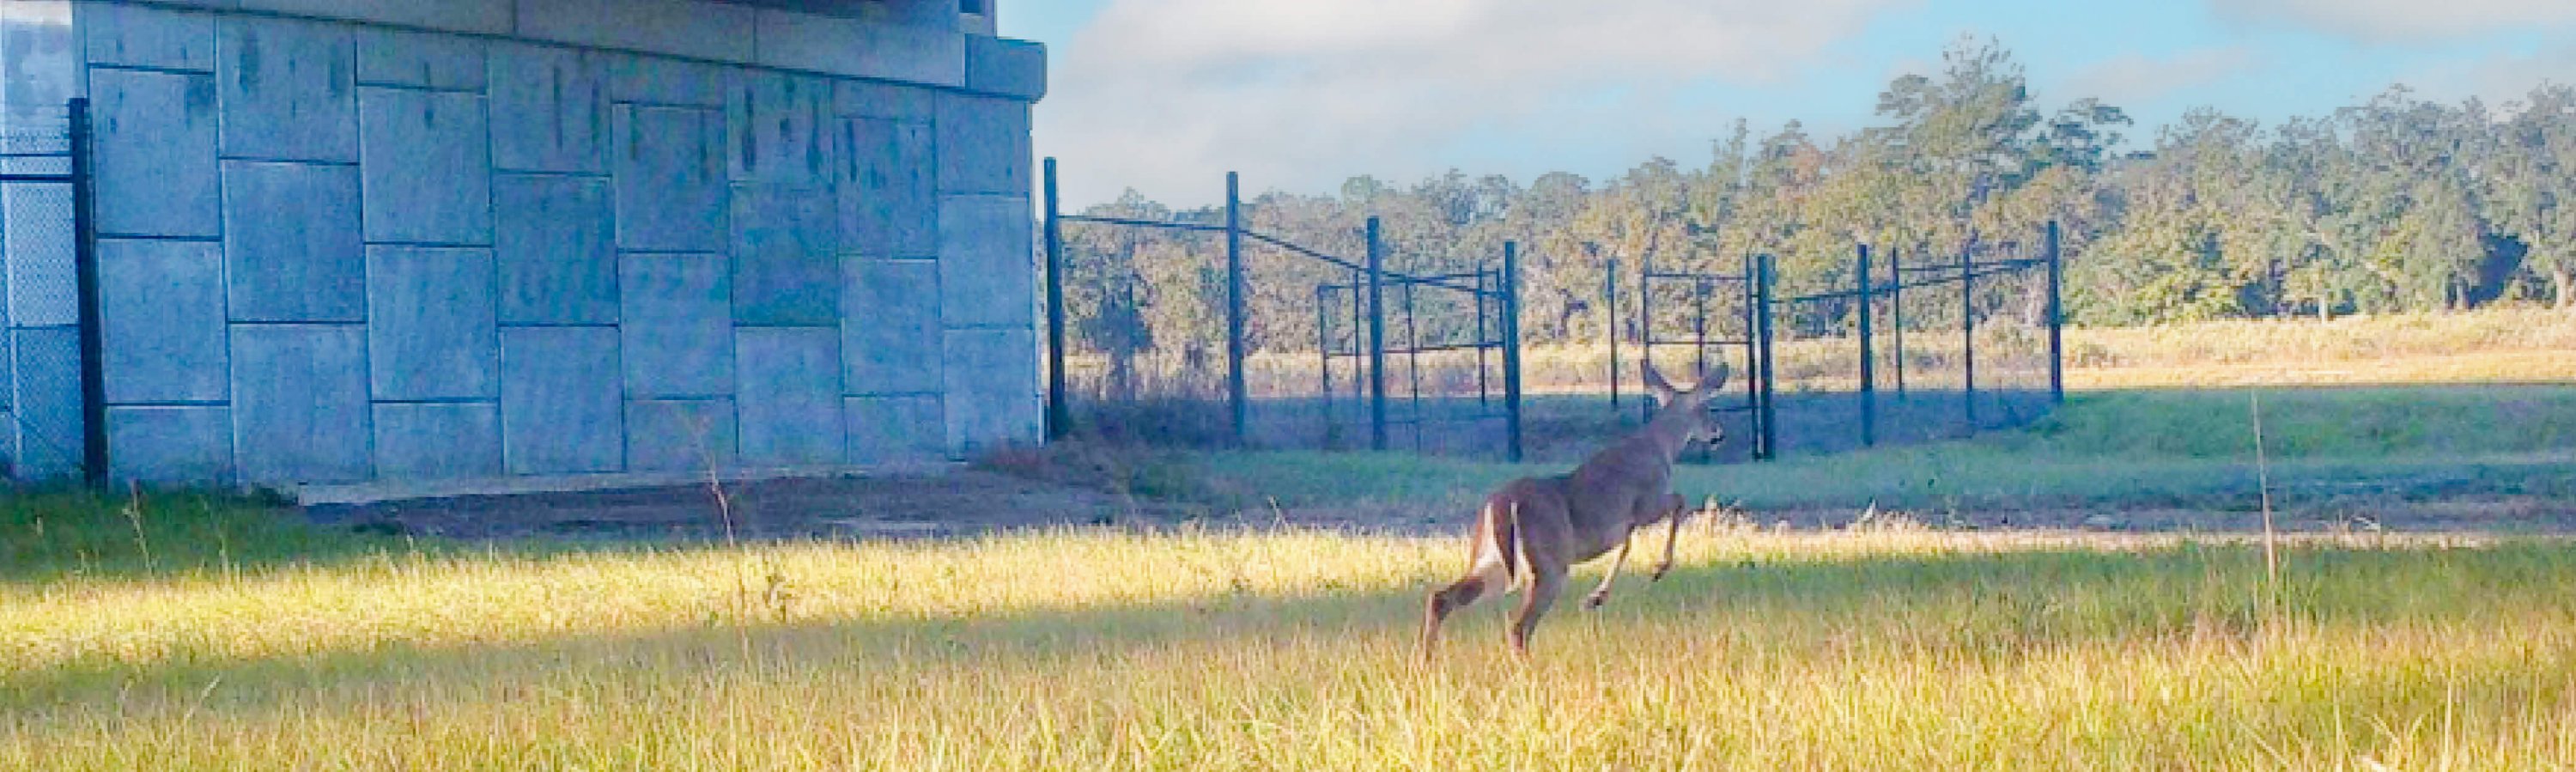 DRMP Teams Up with the University of Central Florida to Study Wildlife Crossings 